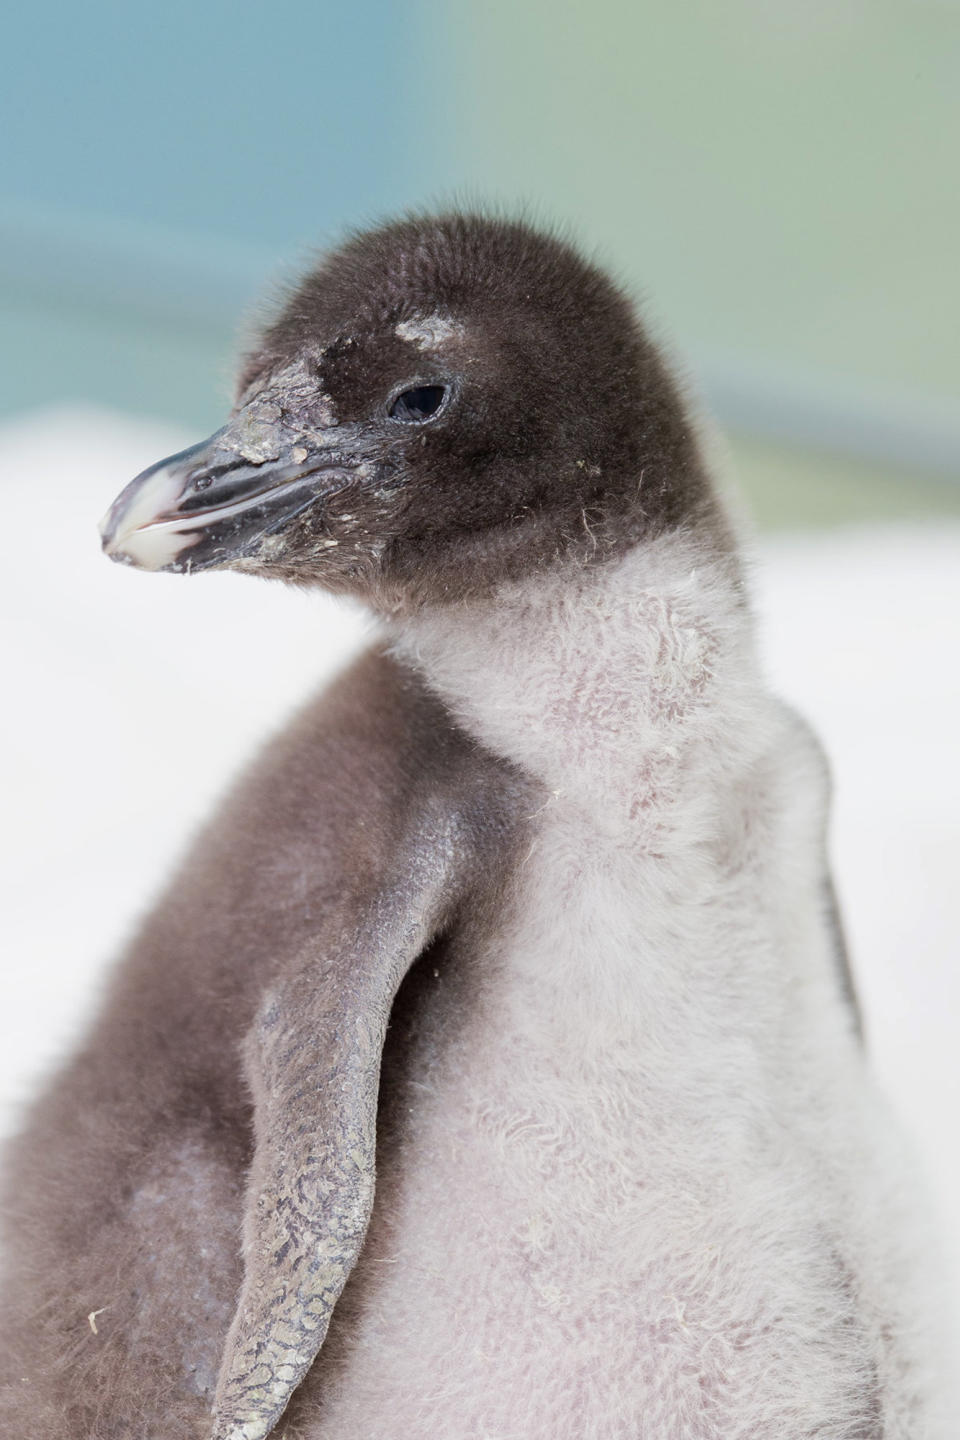 This June 18, 2013, photo provided by the Shedd Aquarium in Chicago shows a rockhopper penguin chick that was hatched at the aquarium on June 12, 2013. (AP Photo/Shedd Aquarium, Brenna Hernandez)